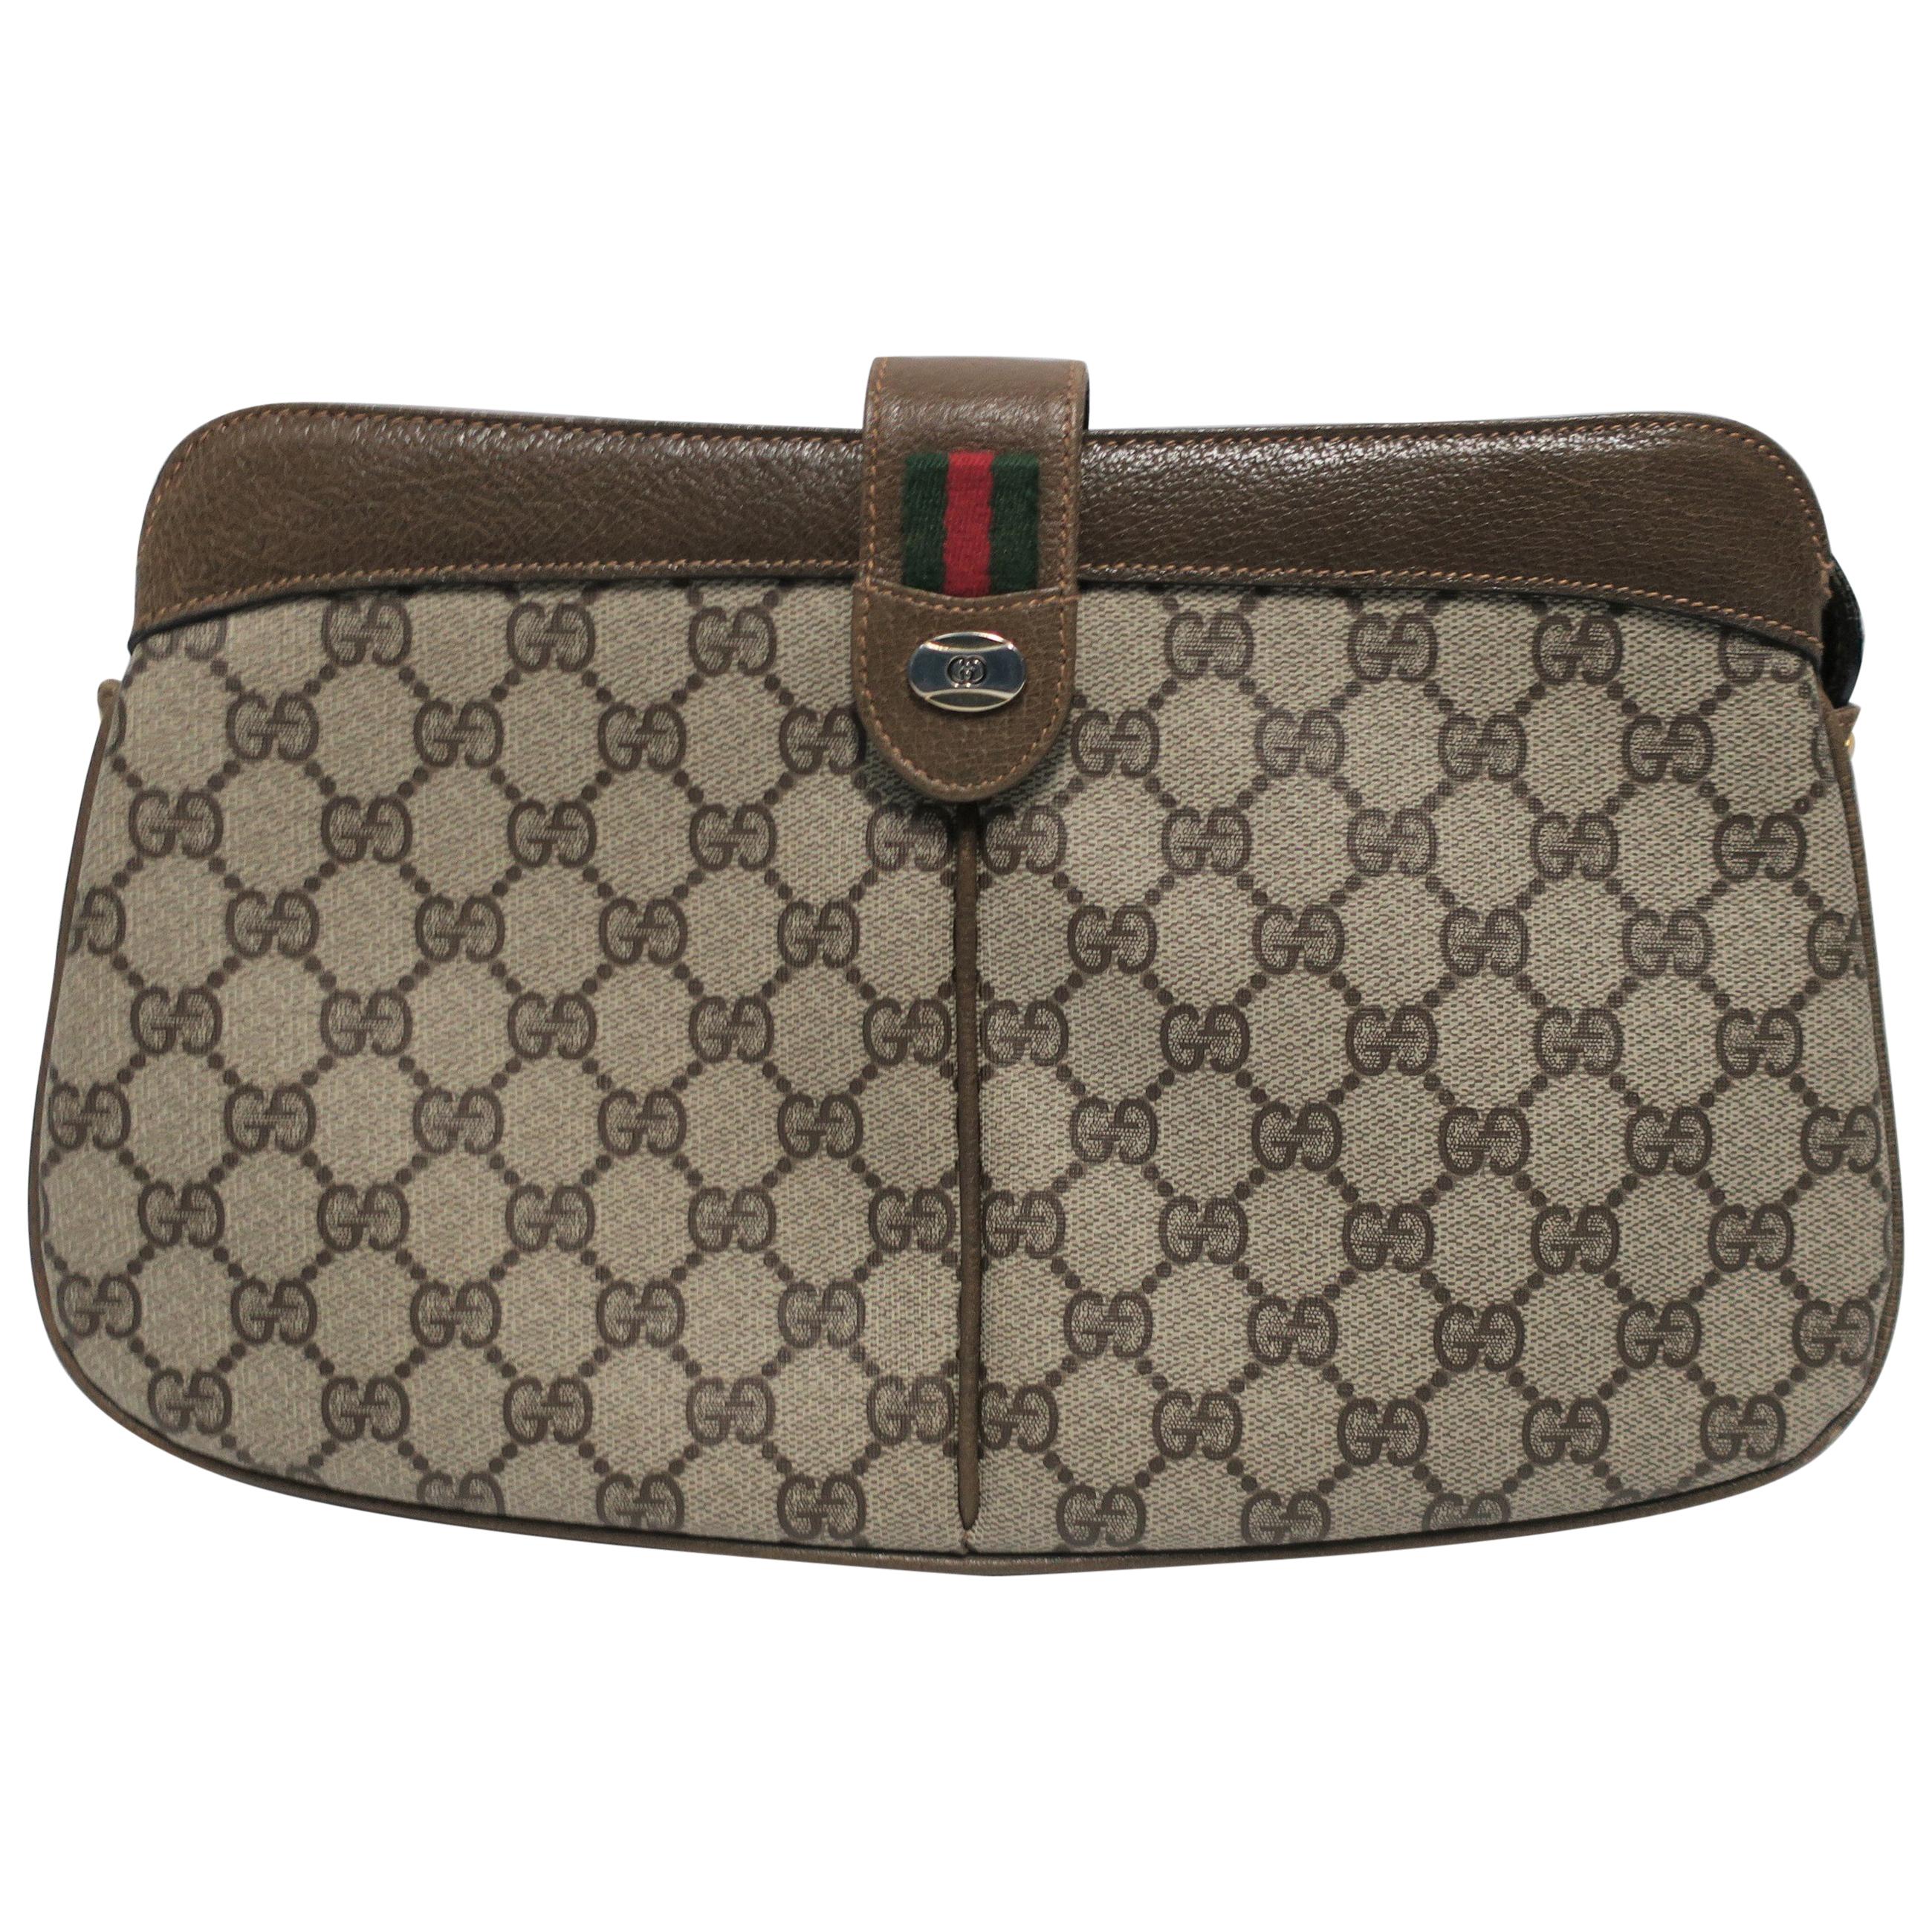 Gucci Leather and Canvas Handbag Clutch